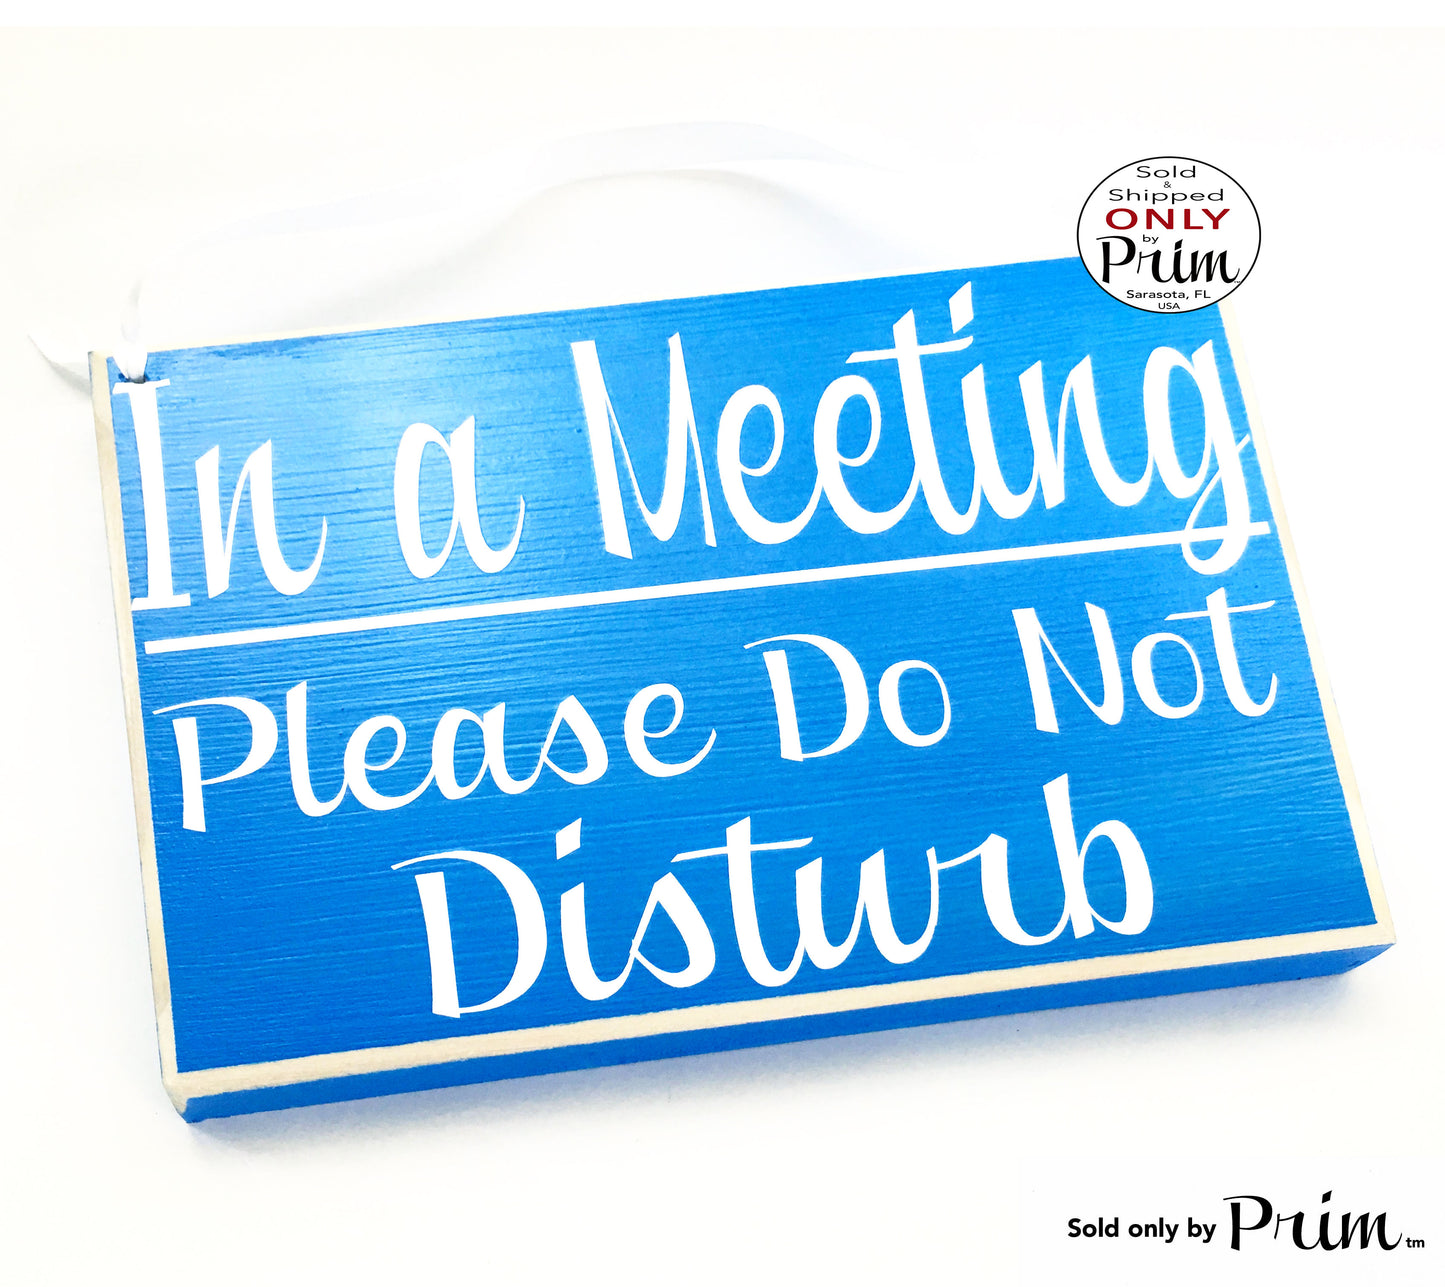 8x6 In a Meeting Please Do Not Disturb Custom Wood Sign Spa Salon Office Door Conference In Session Progress Wall Decor Hanger Door Plaque Designs by Prim